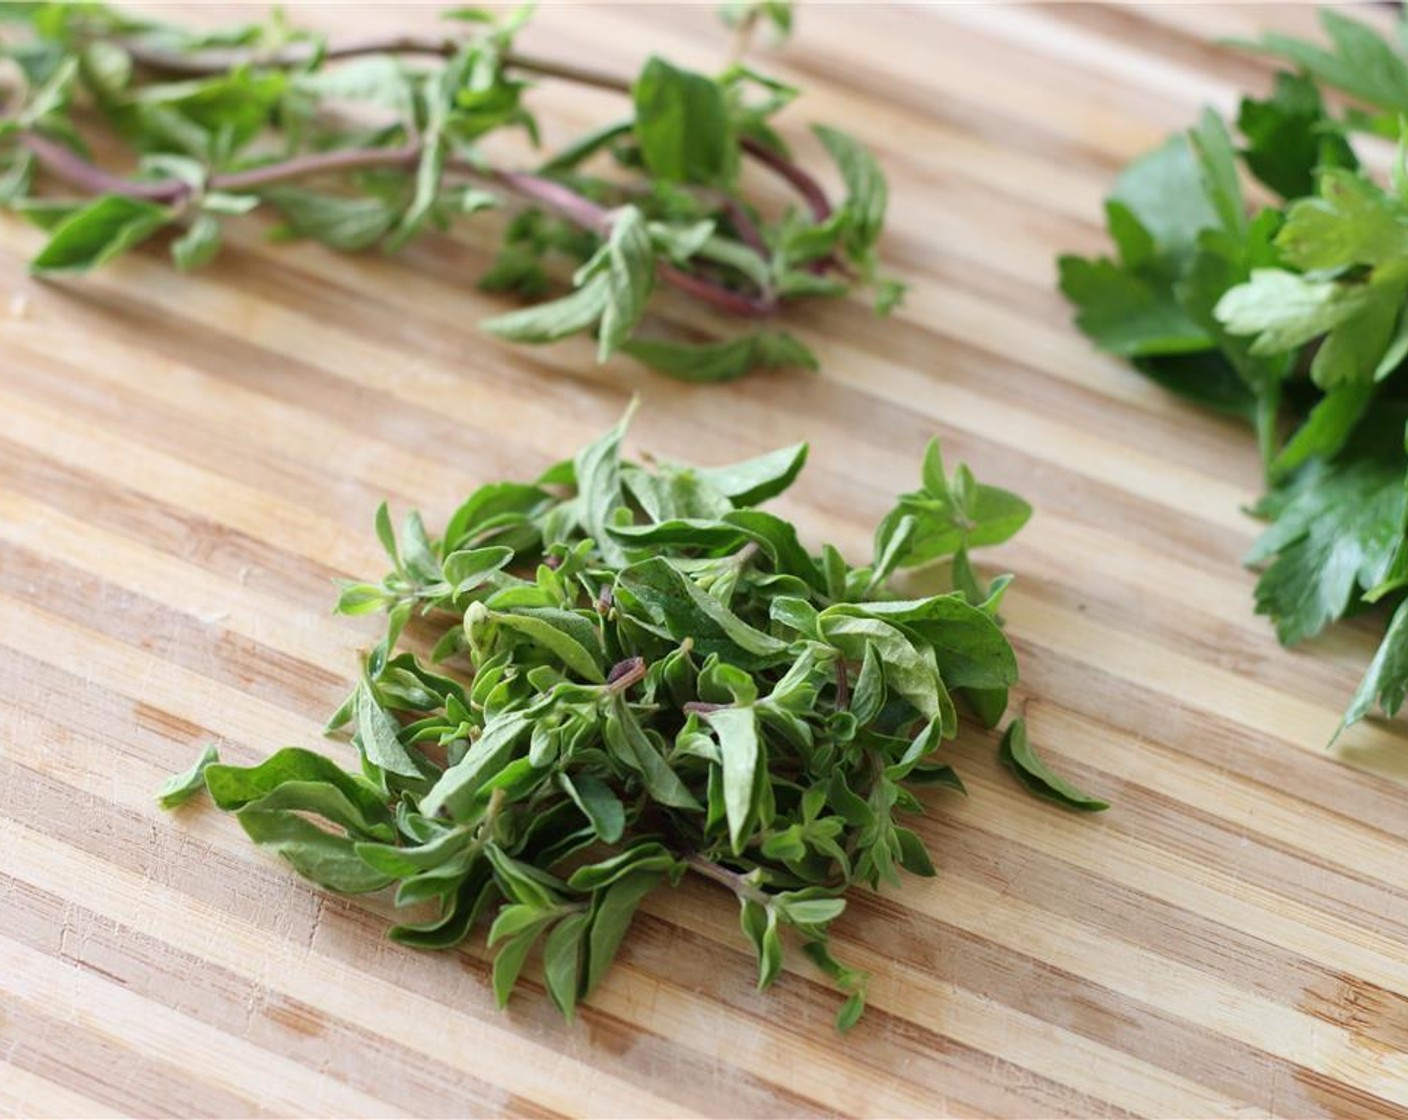 step 2 Pull the leaves from the stems of the Fresh Parsley (2 Tbsp) and Fresh Oregano (1 Tbsp).